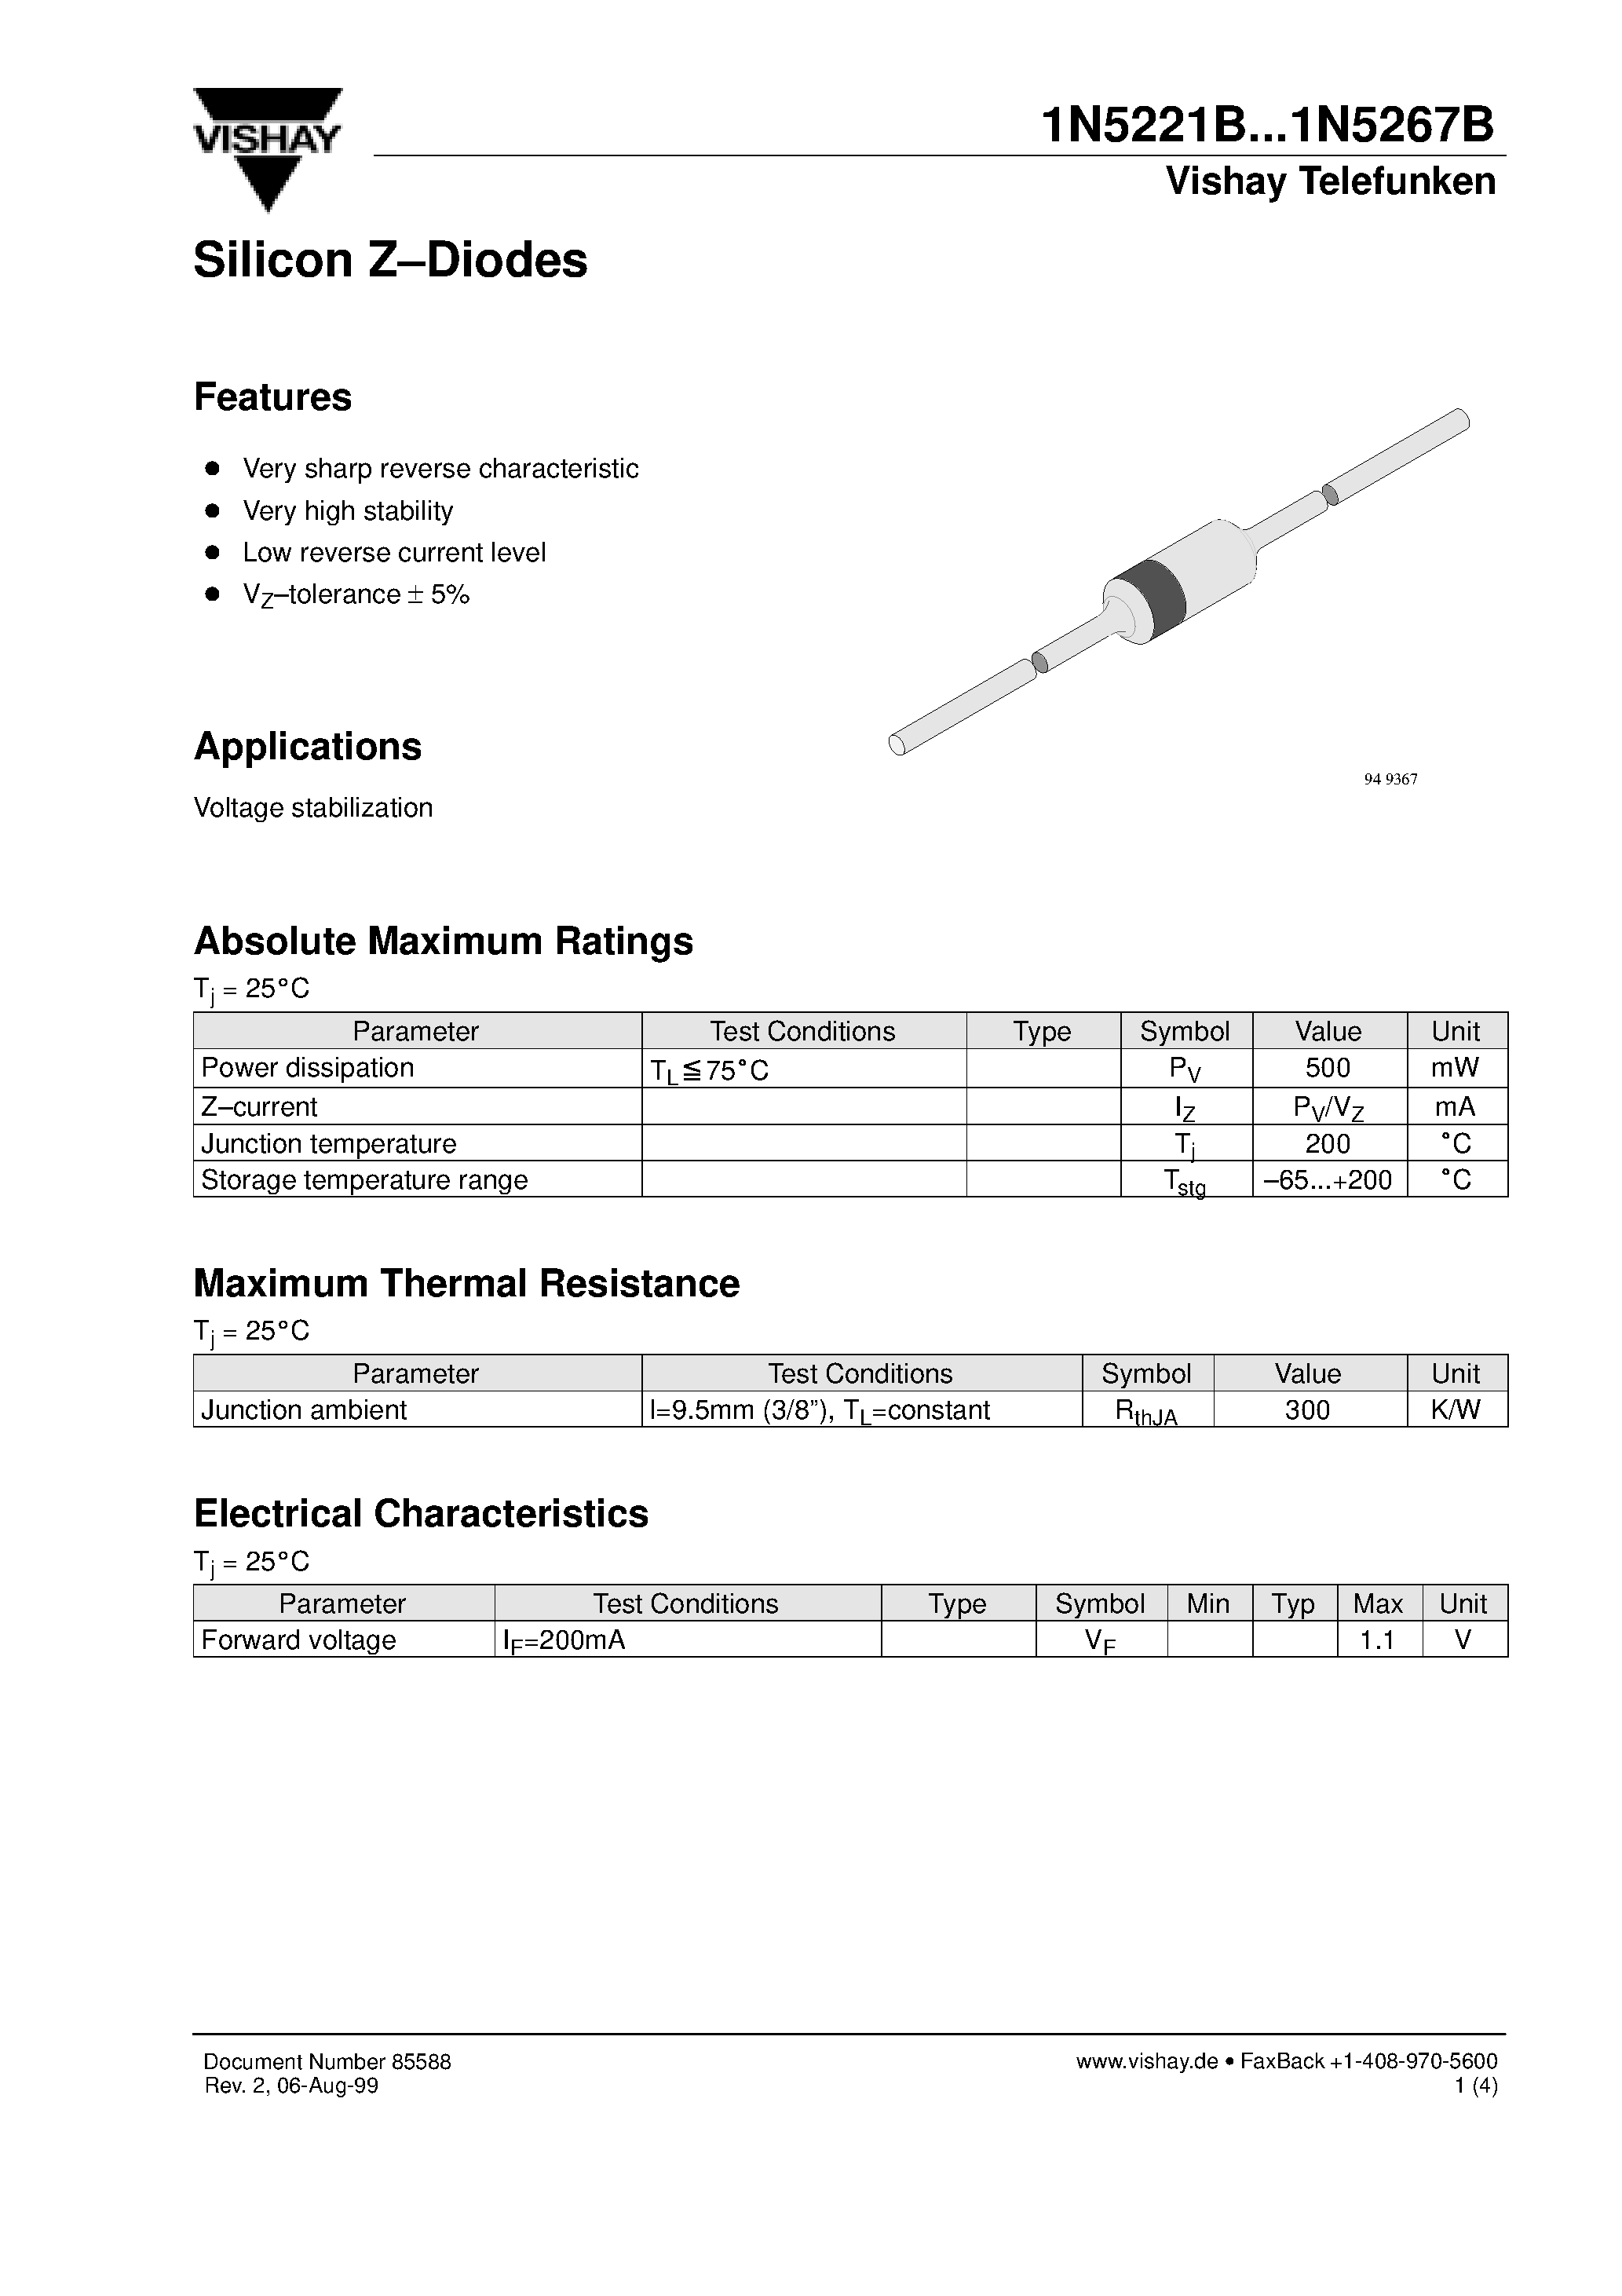 Datasheet 1N5229B - Silicon Z-Diodes page 1